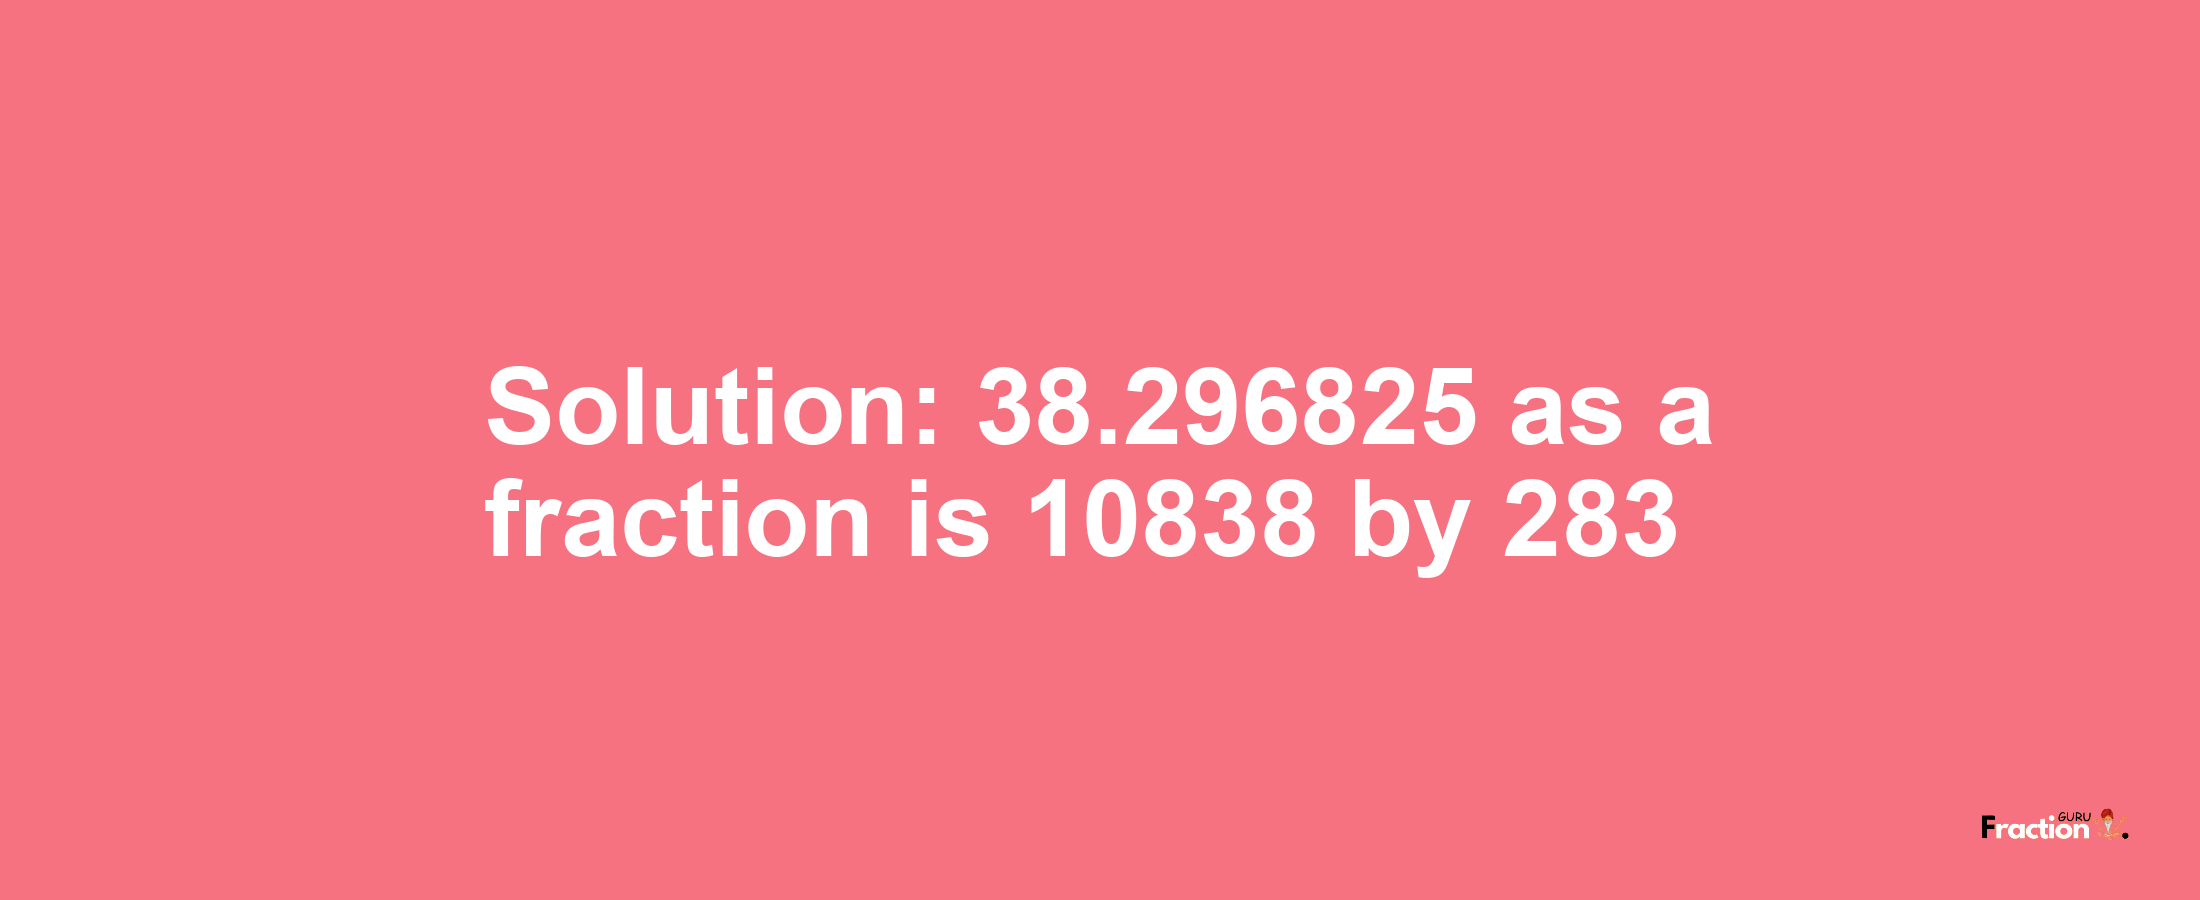 Solution:38.296825 as a fraction is 10838/283